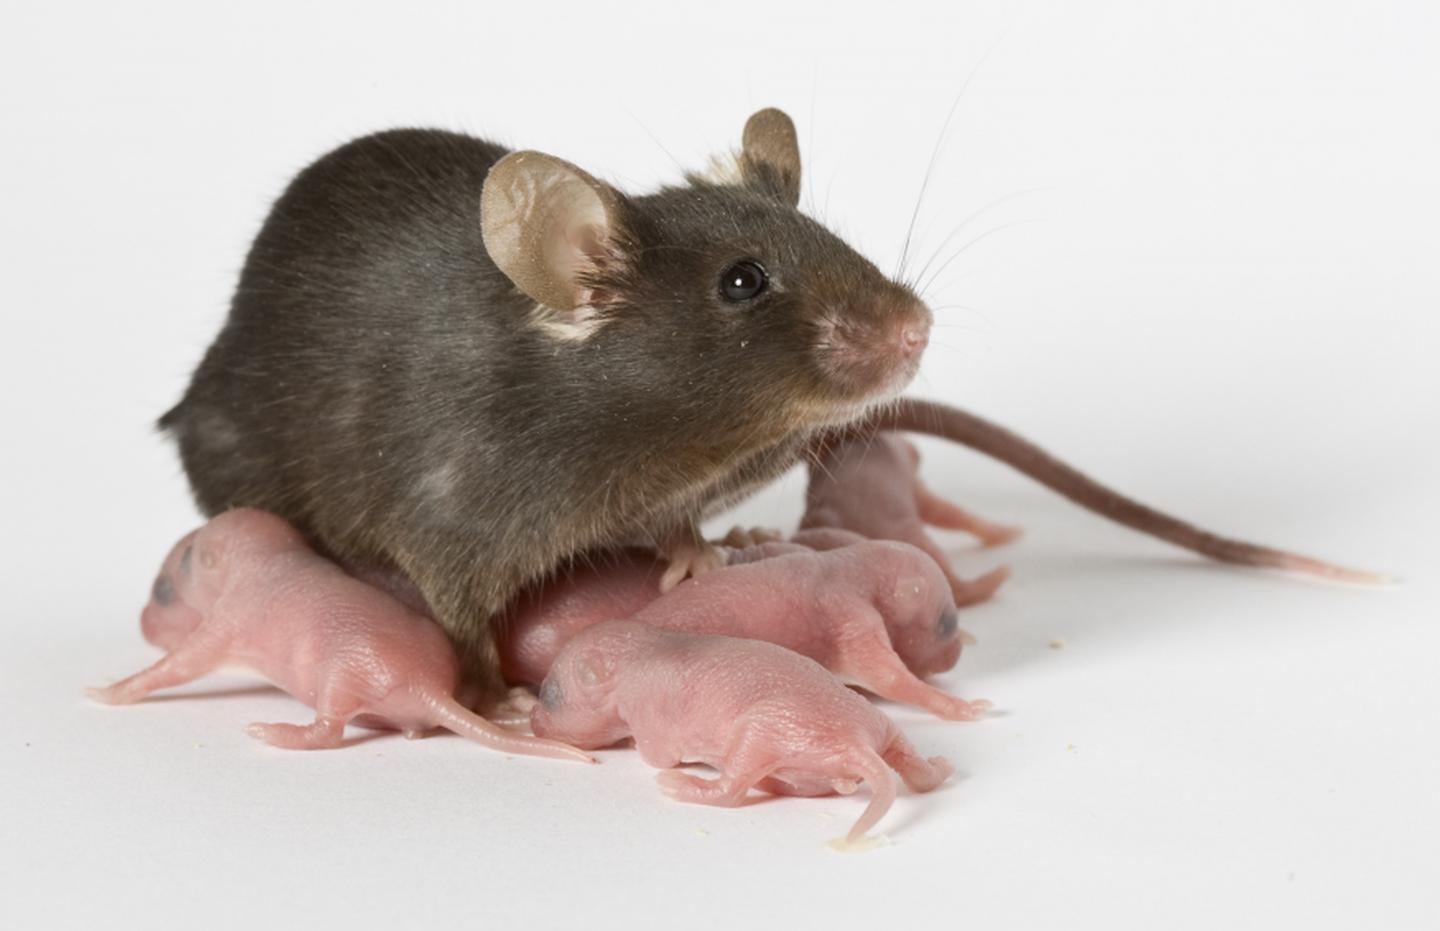 Do baby mice carry diseases?